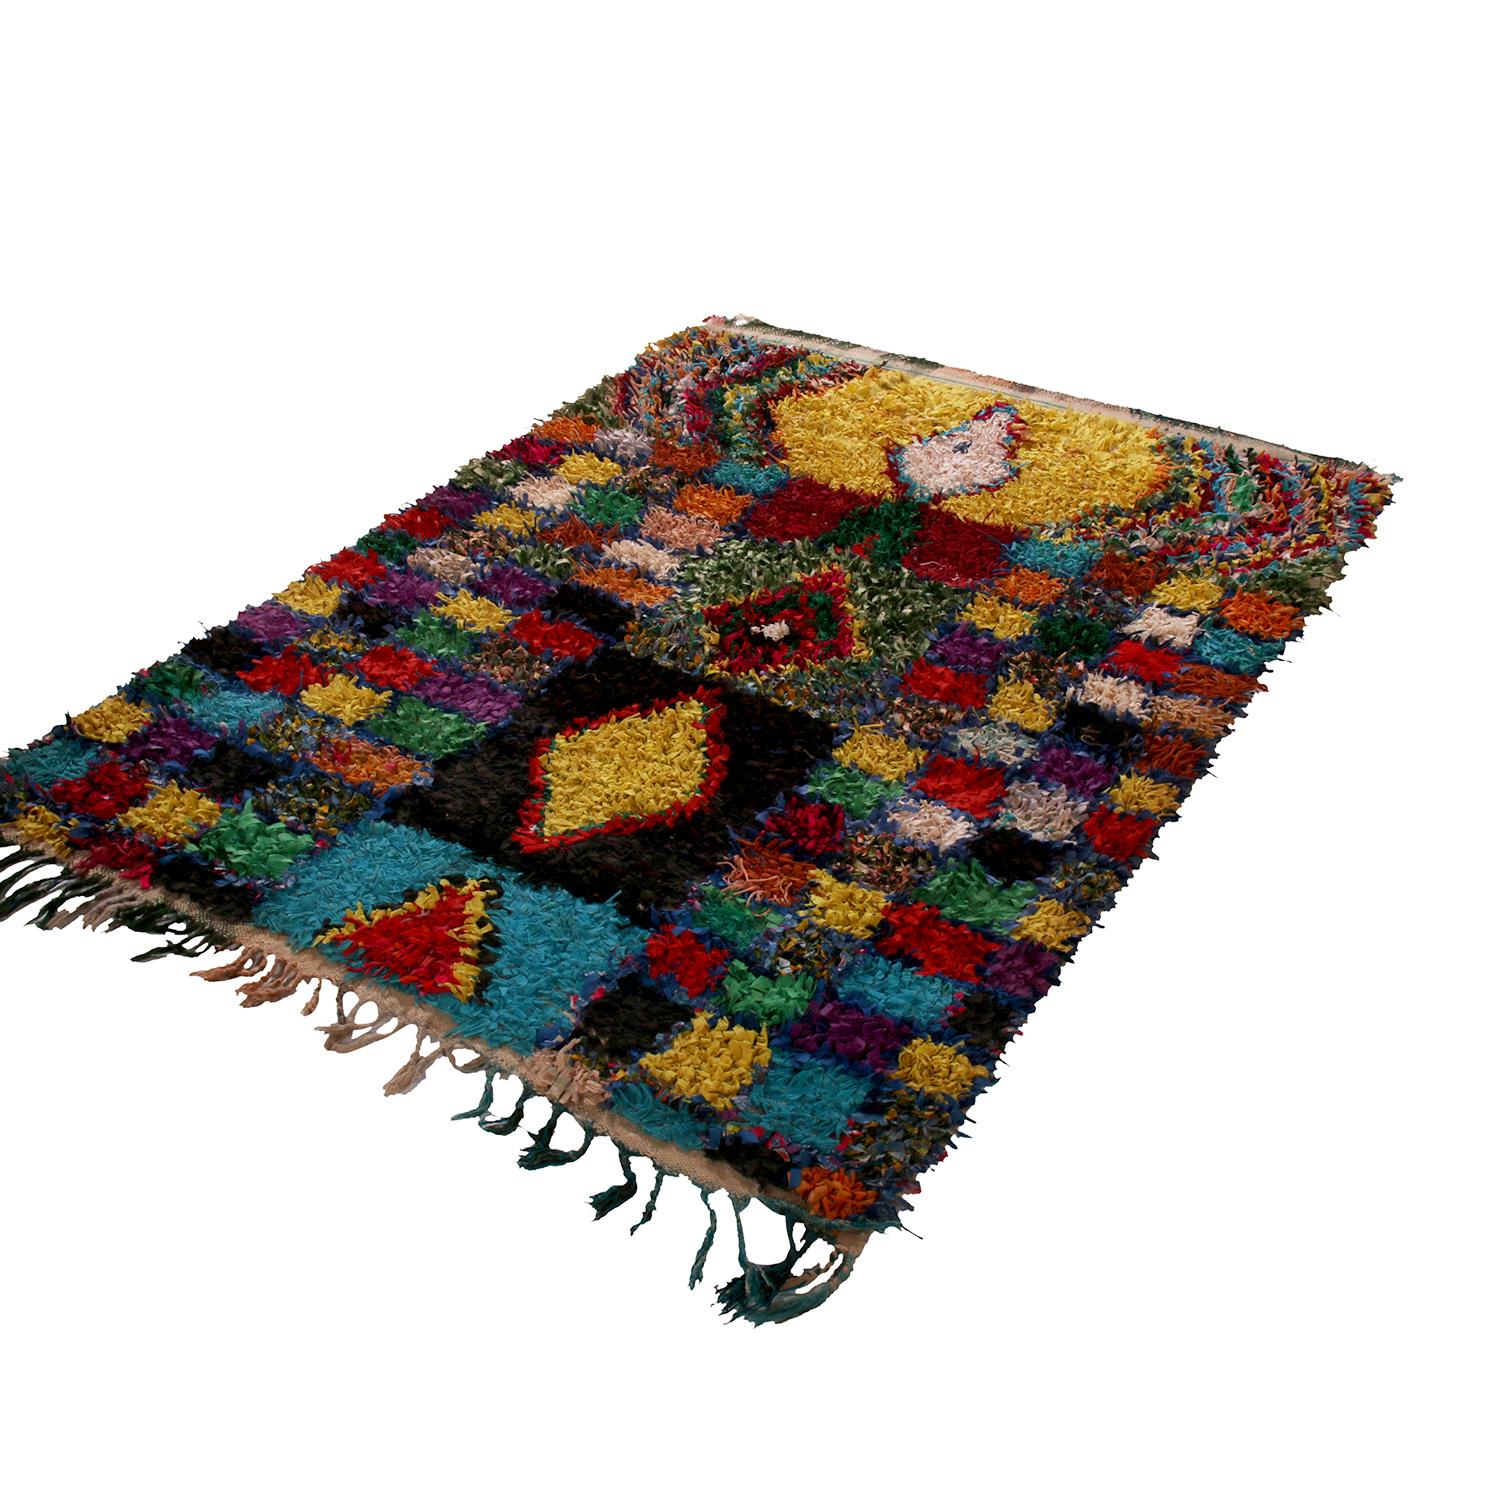 Hand knotted in textural, durable fabric originating between 1950-1960, this vintage Moroccan Berber rug enjoys a warm transitional marriage of lively color and pattern. The shag texture of the fabric pile beautifully complements the play of vibrant